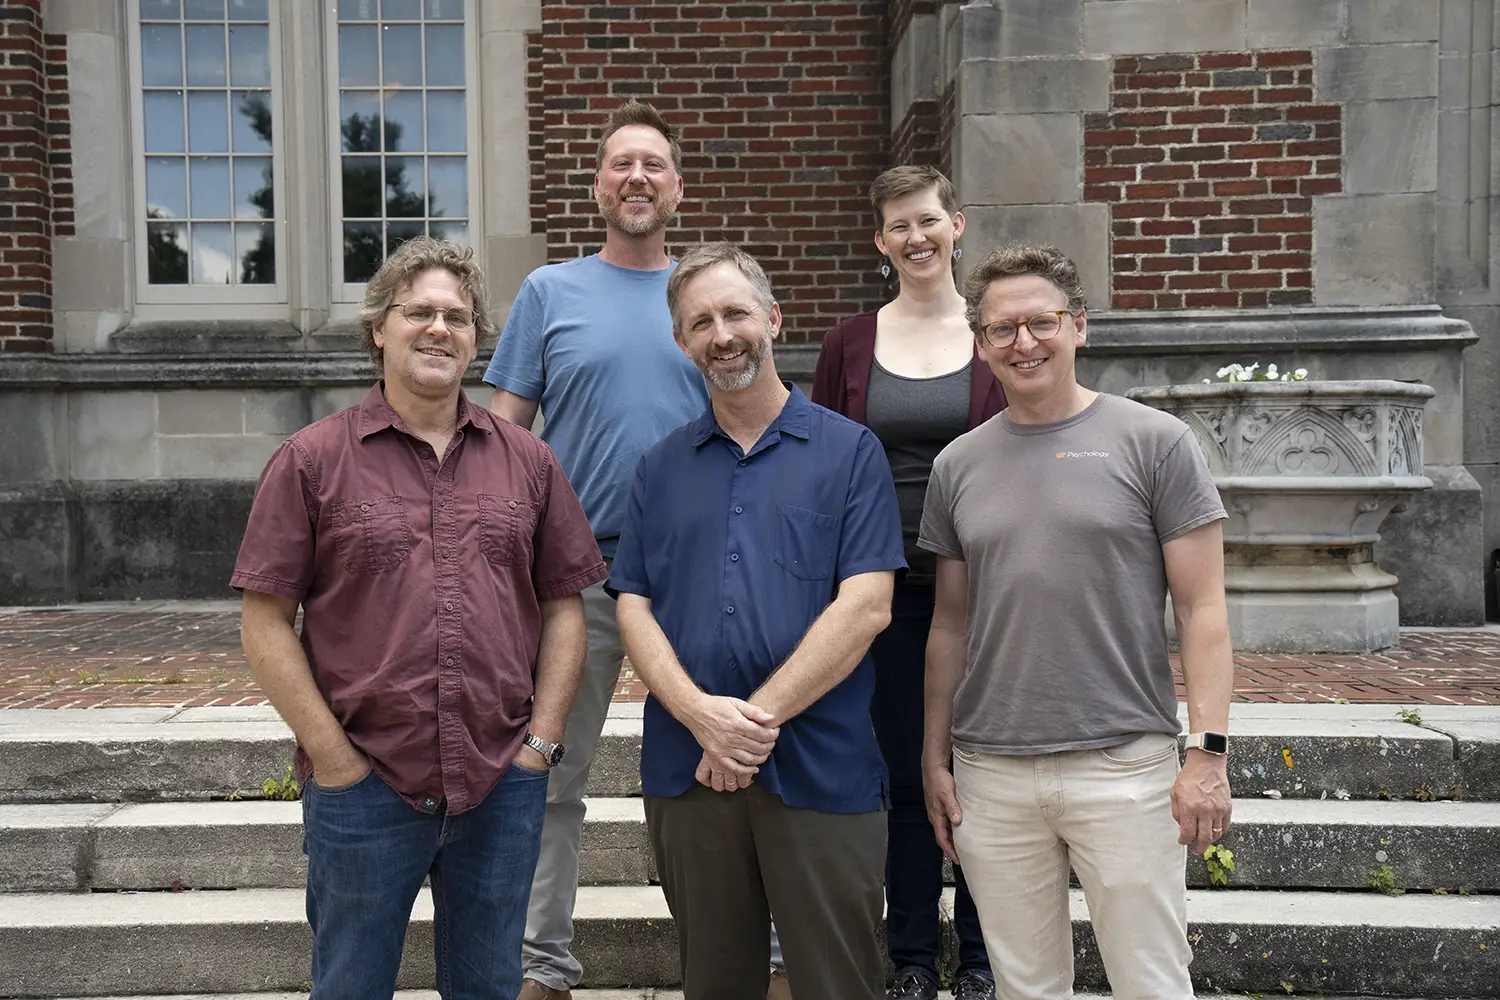 Five faculty members lined up on the steps in front of a brick building